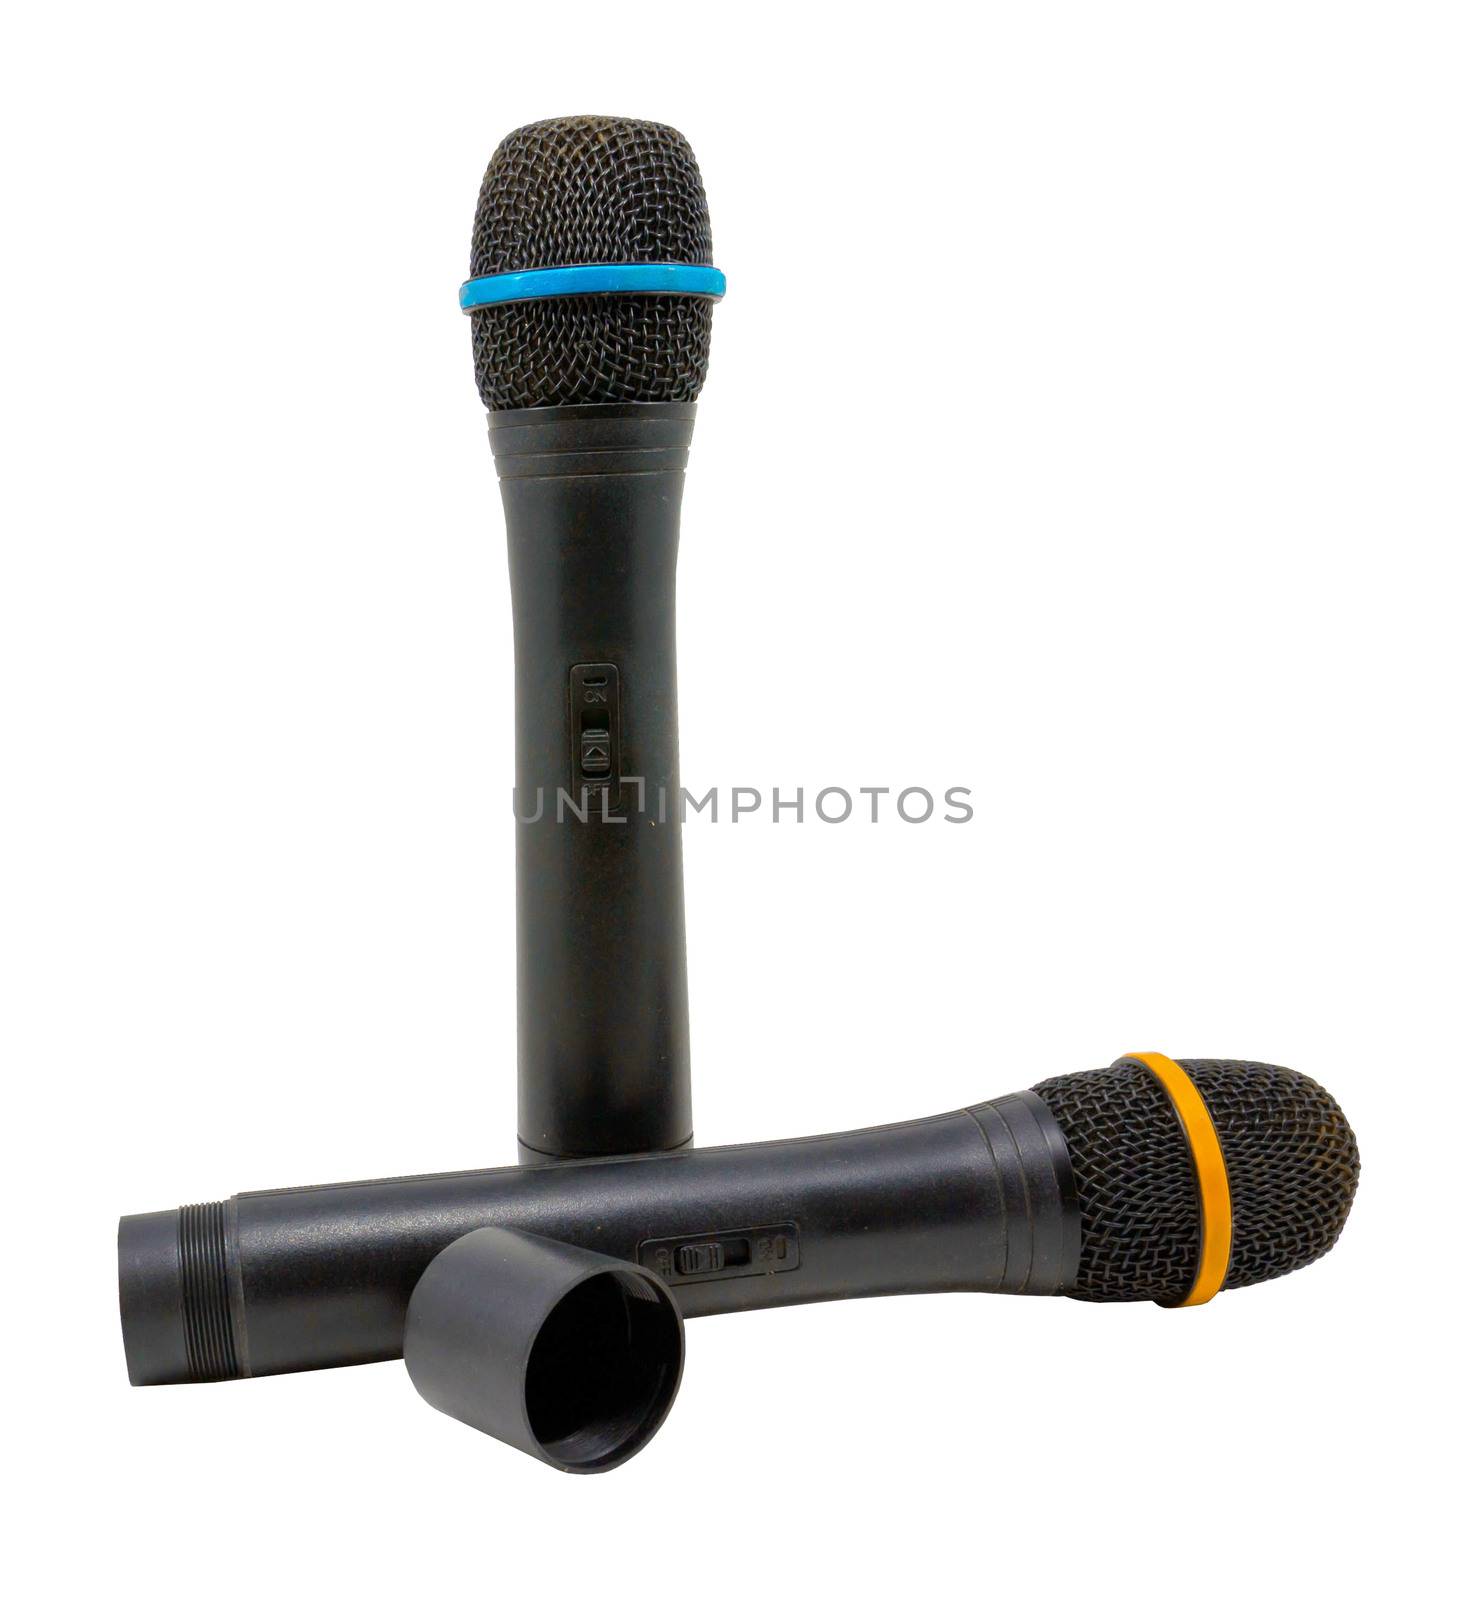 Two wireless microphones isolated on a white background by sutipp11